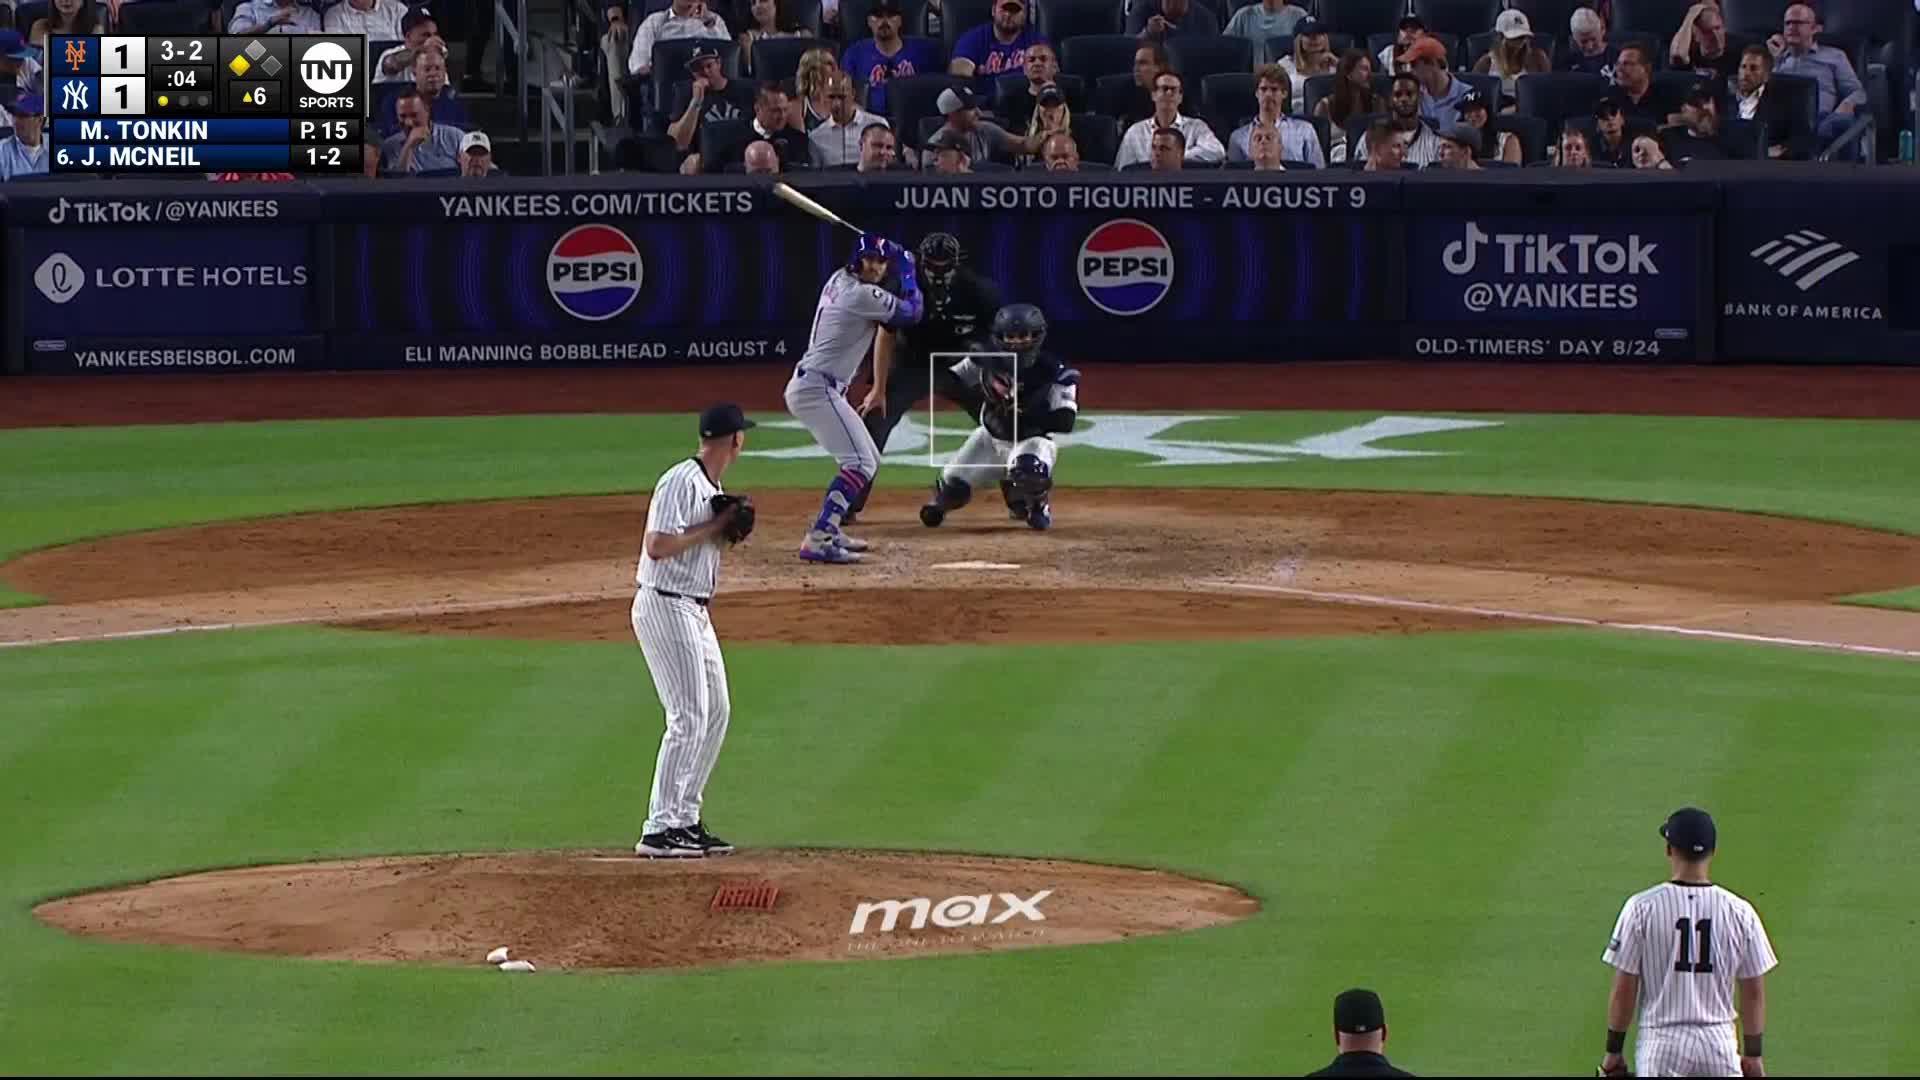 Home Run by Jeff McNeil